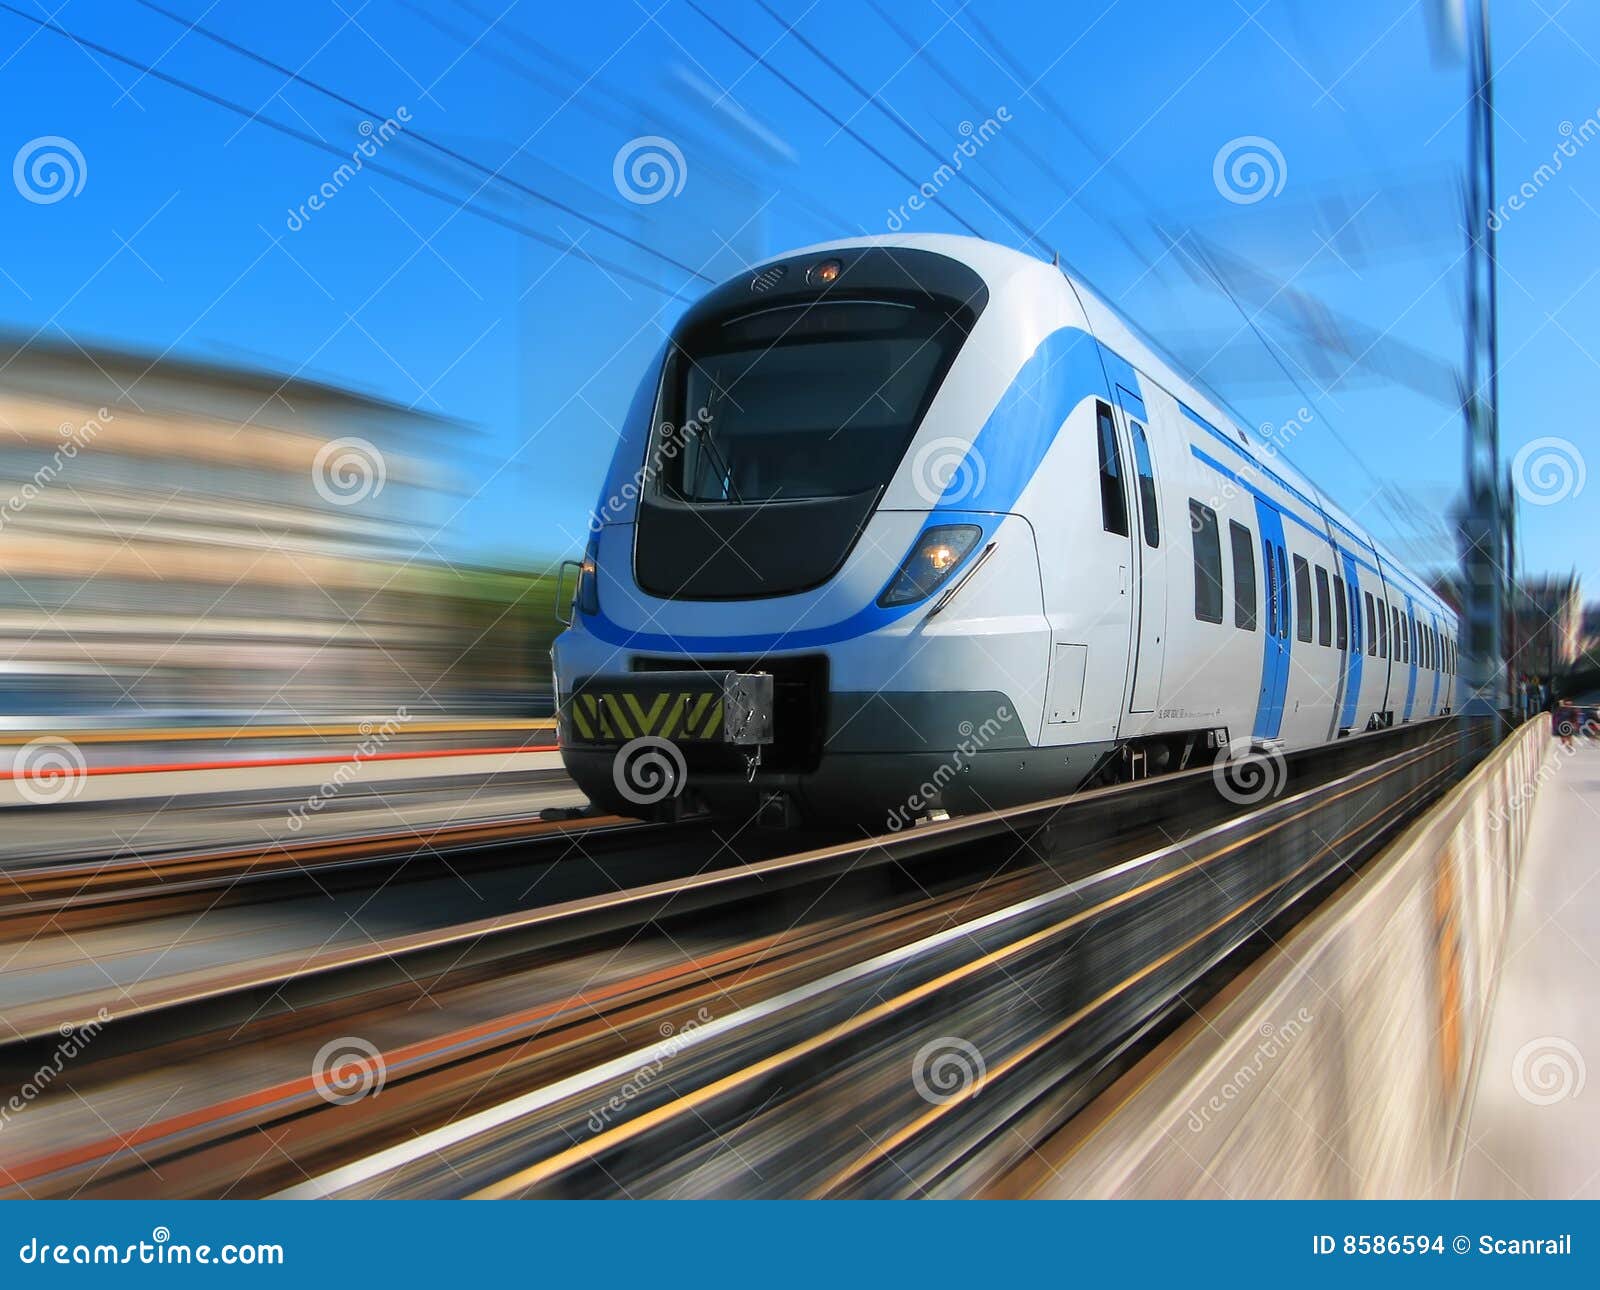 high-speed train in motion